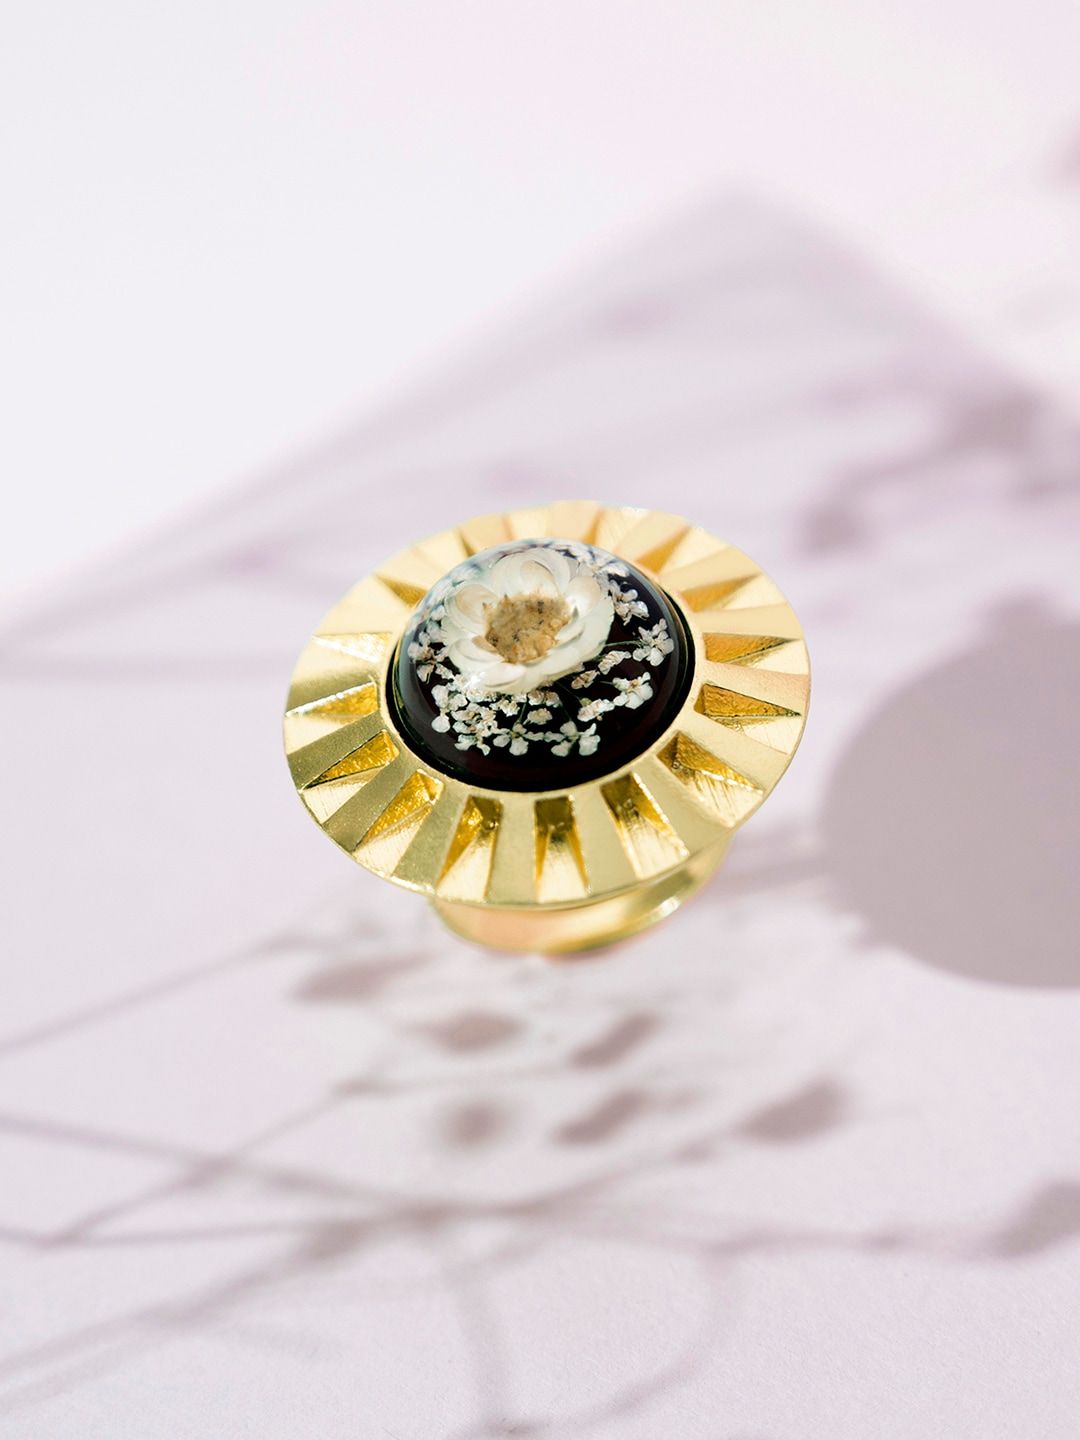 Mikoto by FableStreet Gold-Plated Black & White Dry Flower Handcrafted Adjustable Finger Ring Price in India